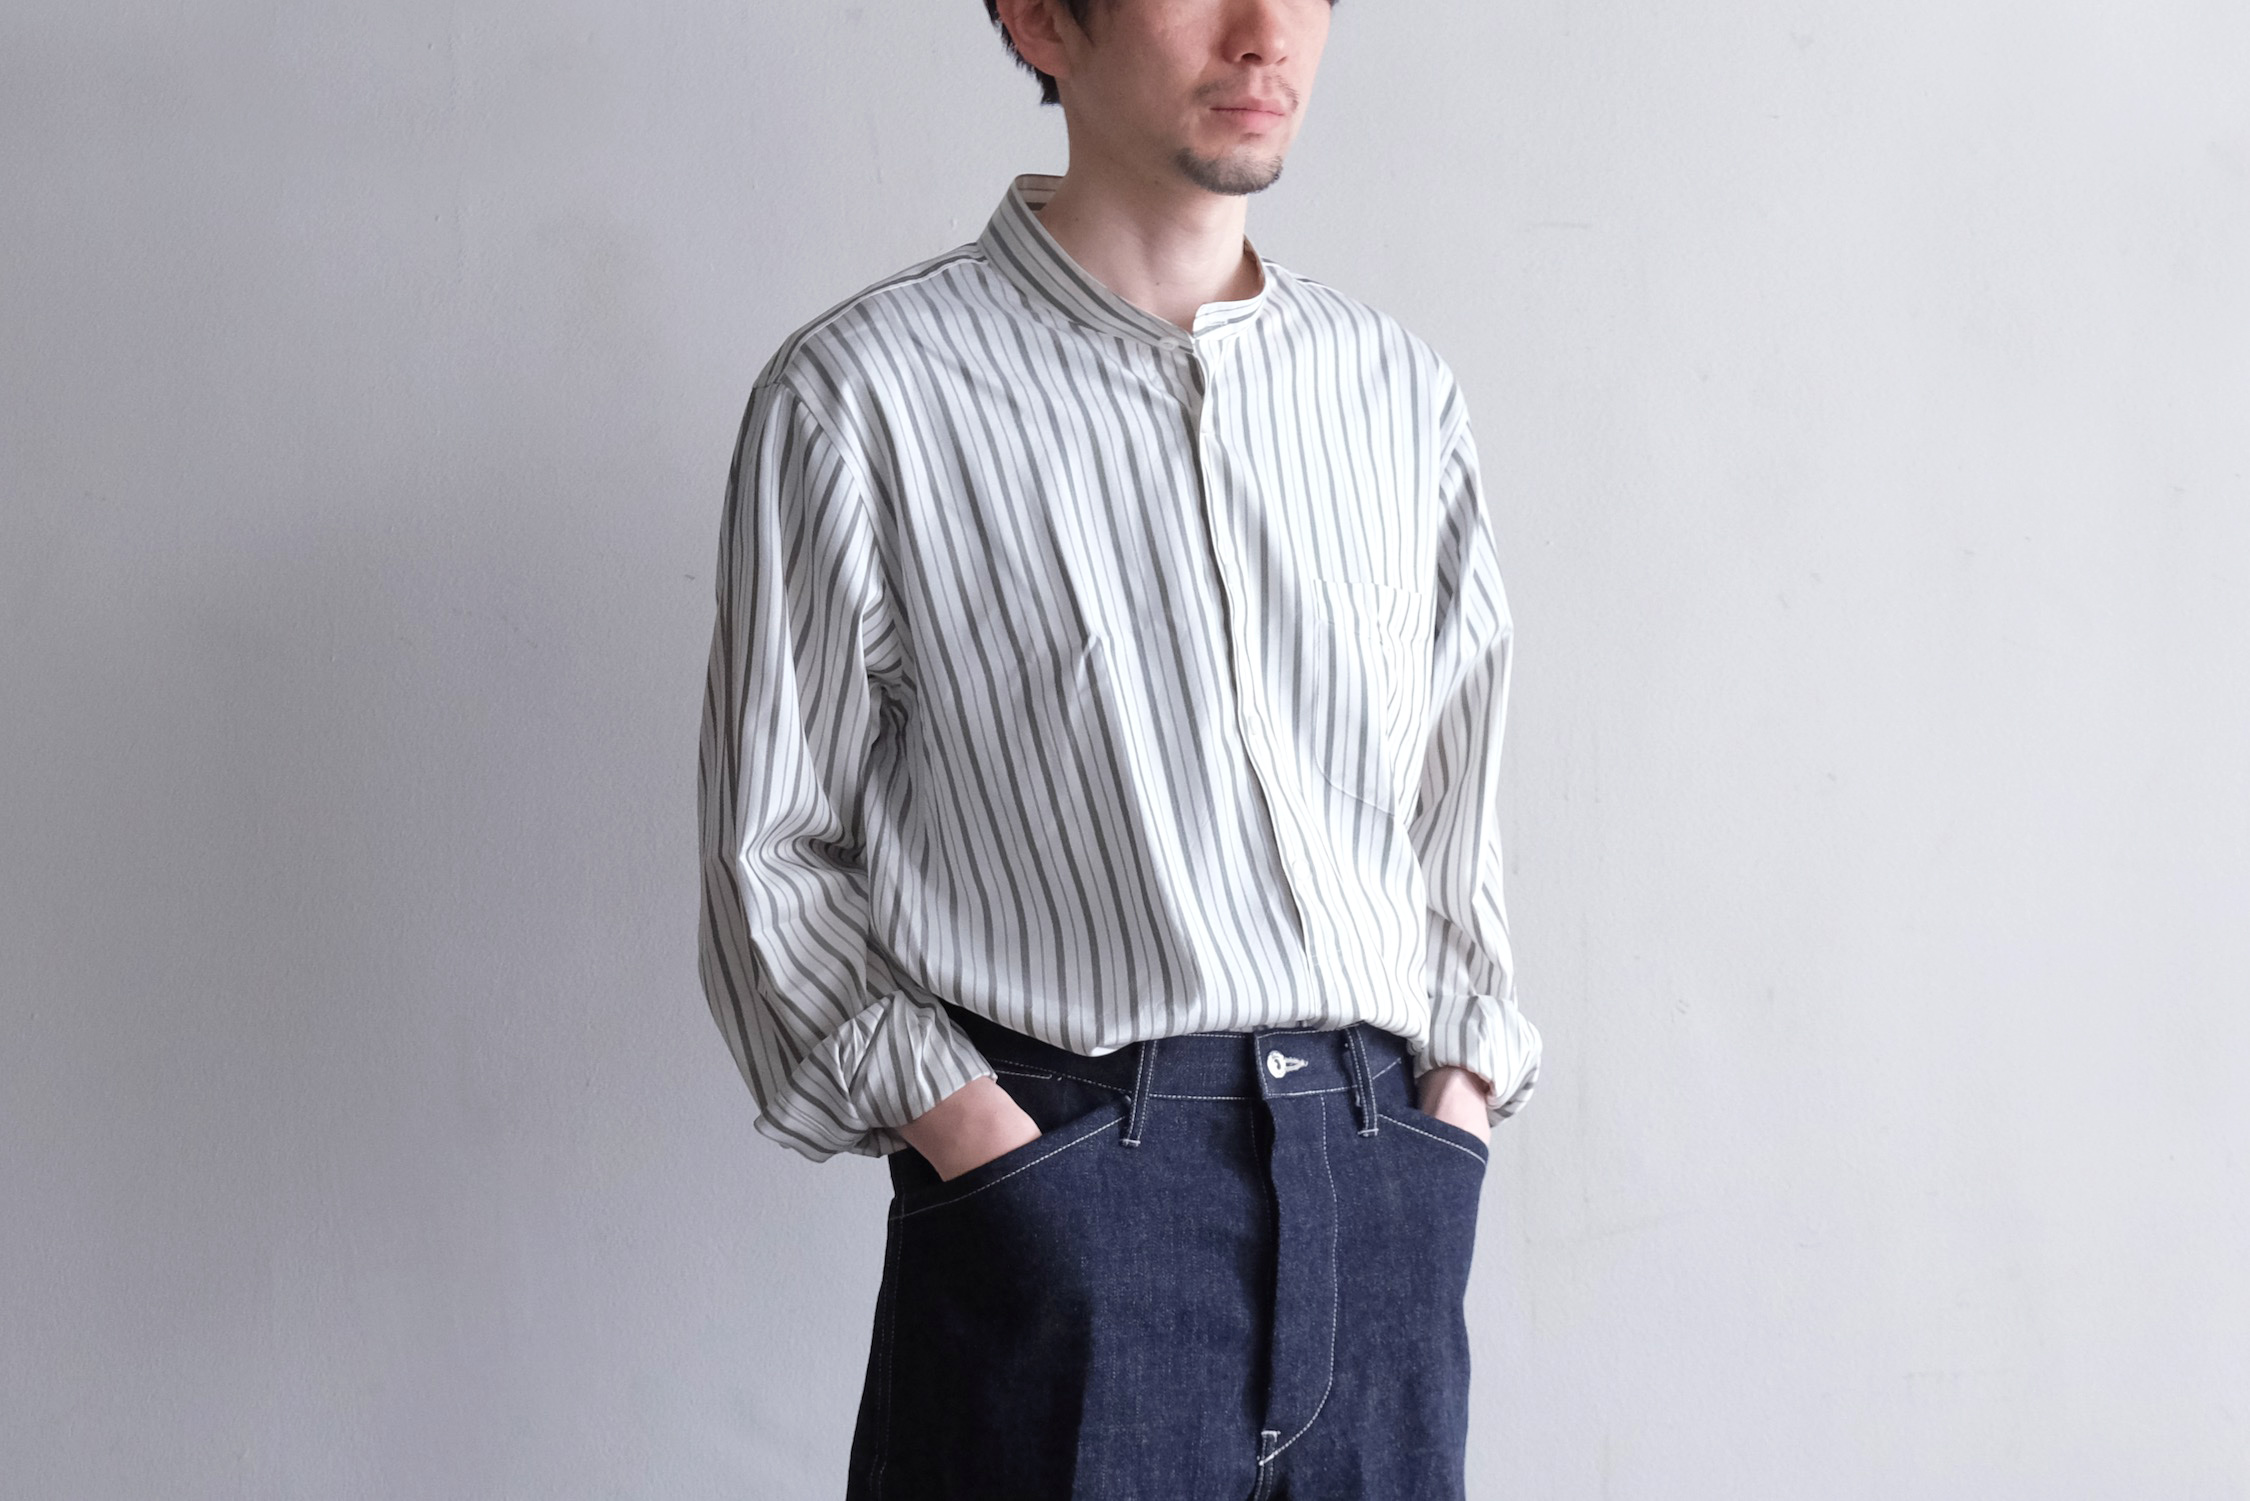 MAATEE&SONS SILK PULLOVER SHIRTS シルク シャツ